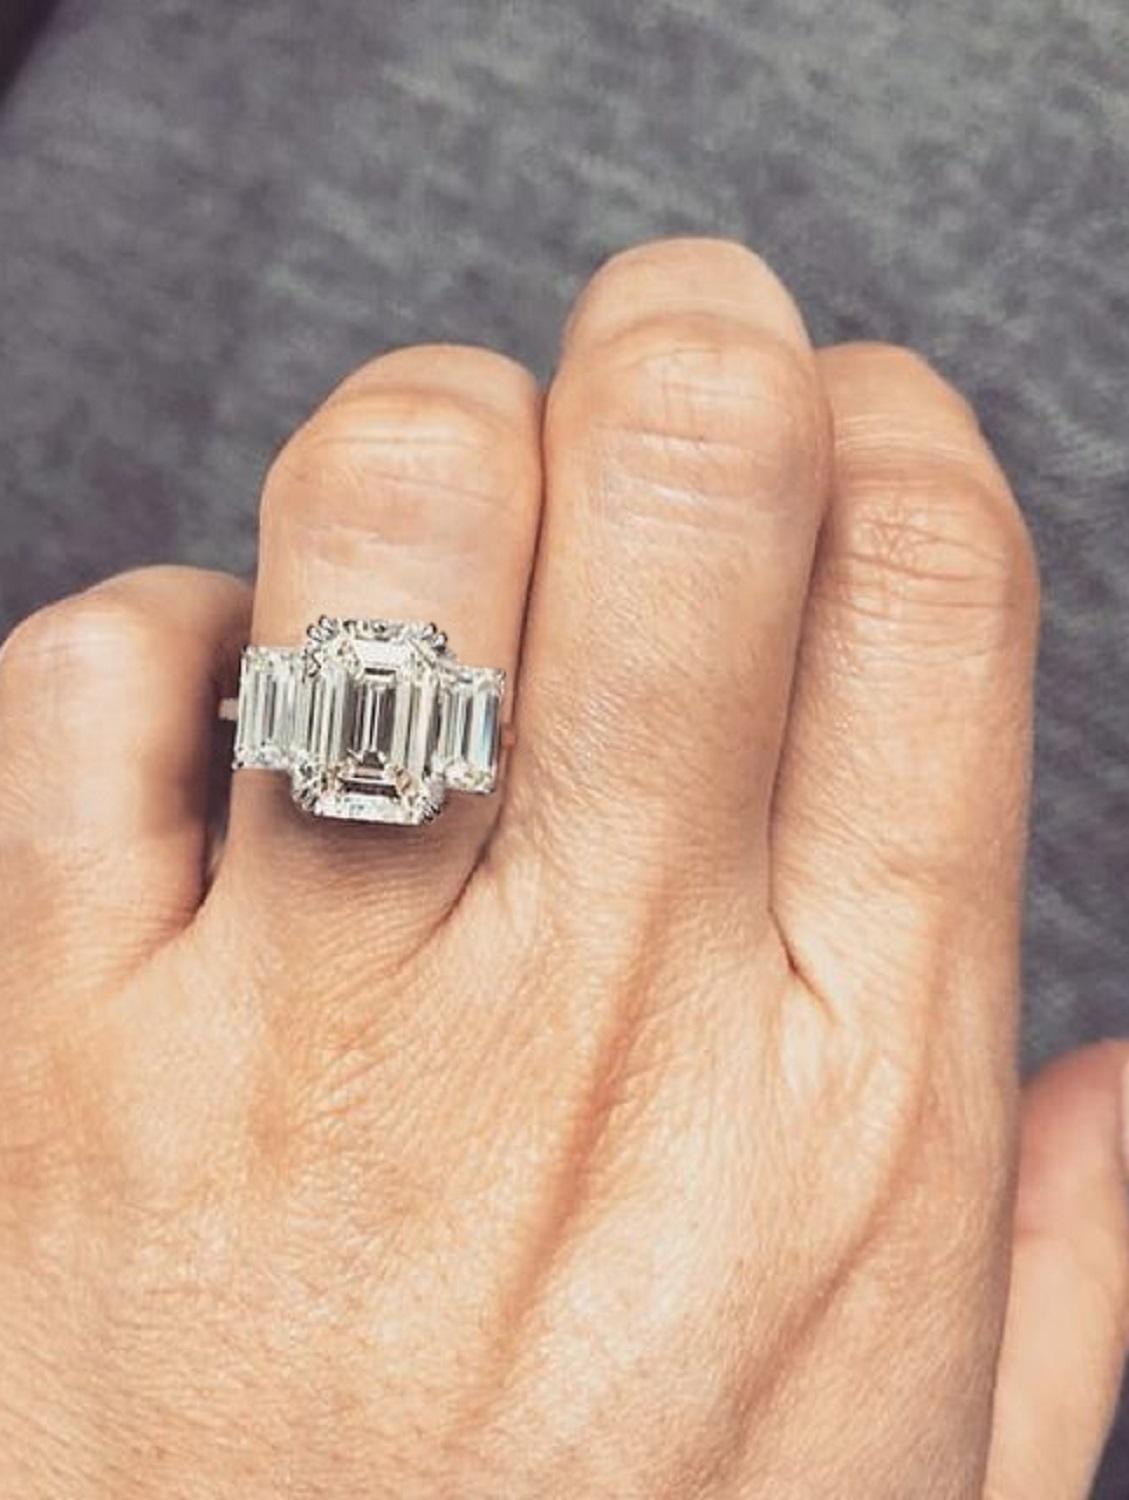 GIA Certified 2.50 Carat Three Stone Emerald Cut Diamond Platinum Ring 
Internally flawless clarity

The side diamonds weight approximately 0.75 carat in total